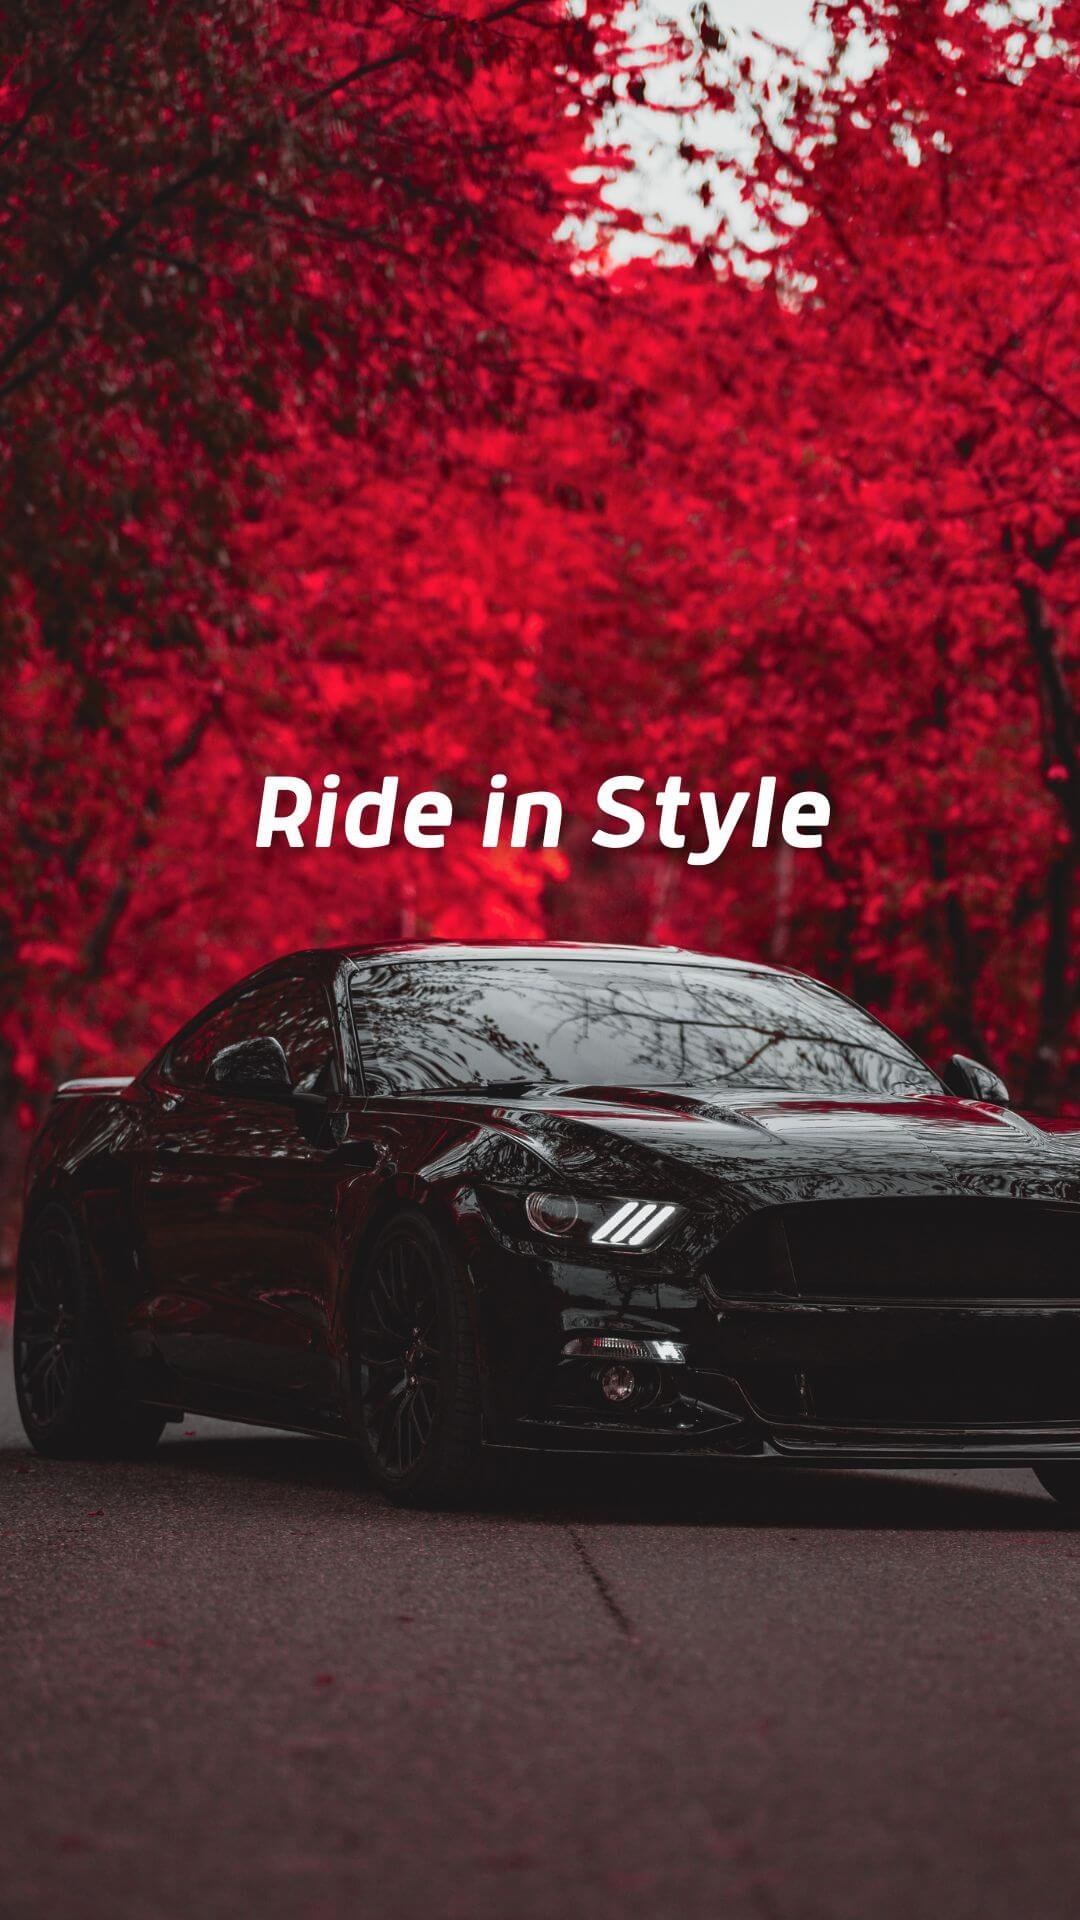 Ride In Style Car IPhone Wallpaper